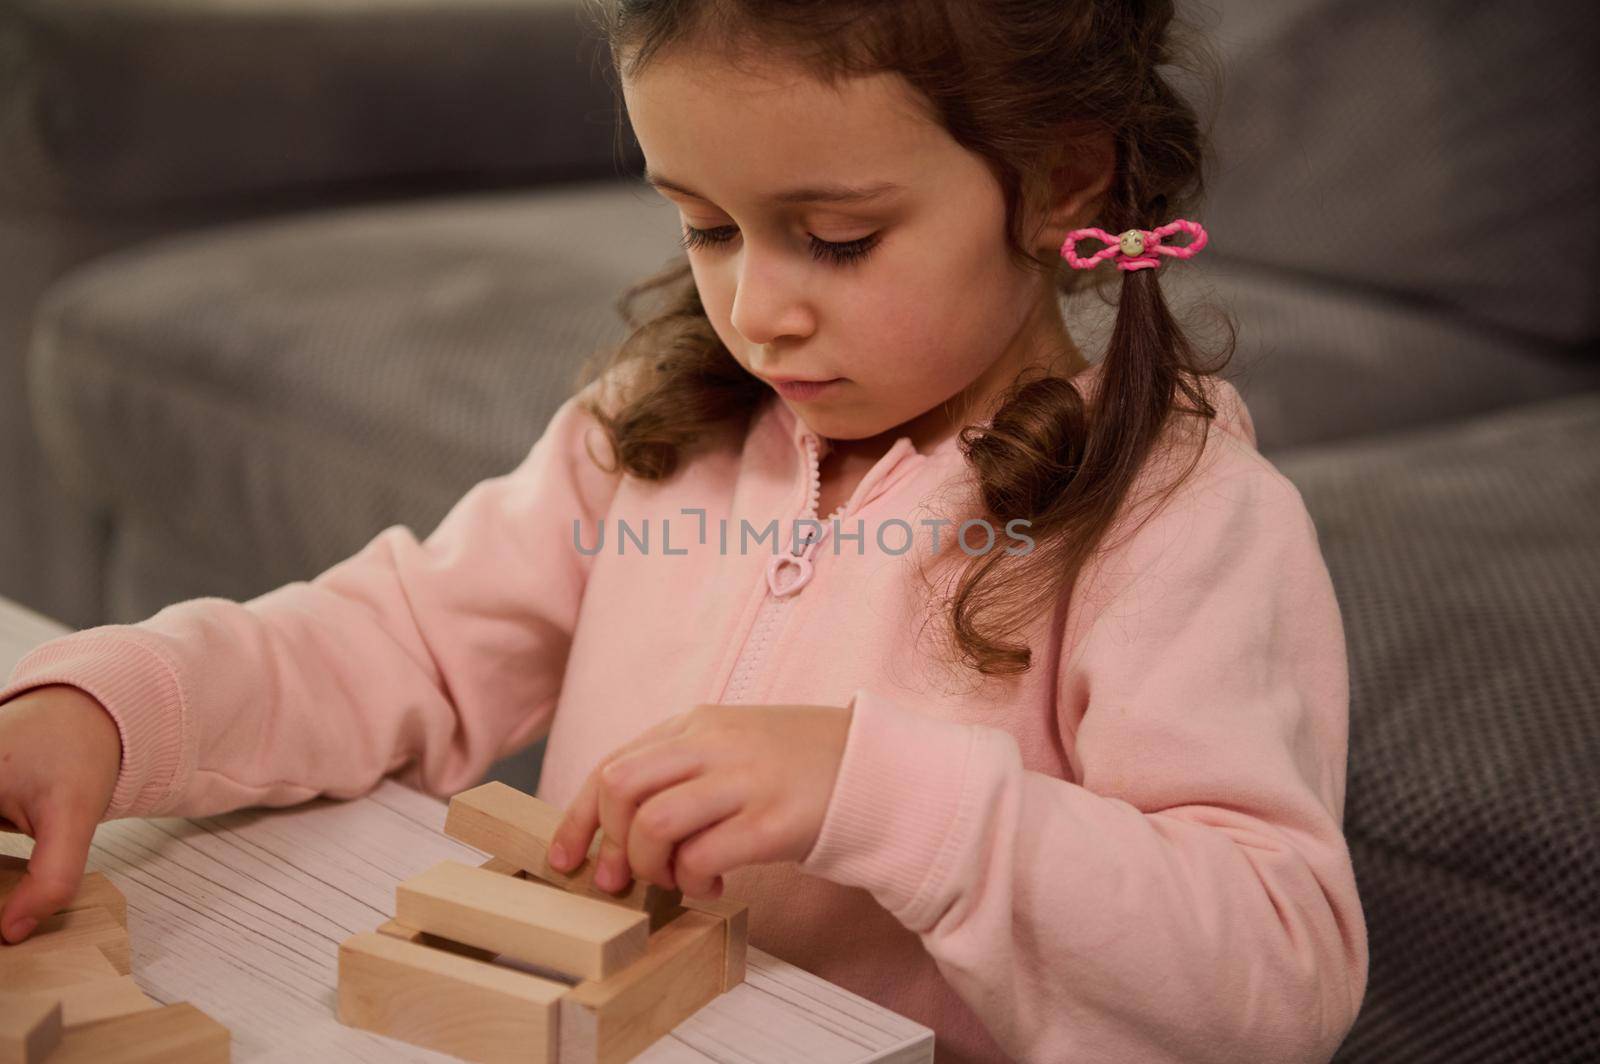 Close-up portrait of charming adorable little preschool Caucasian girl in pink sweatshirt playing with wooden blocks, building structures. Fine motor skills development and educational leisure concept